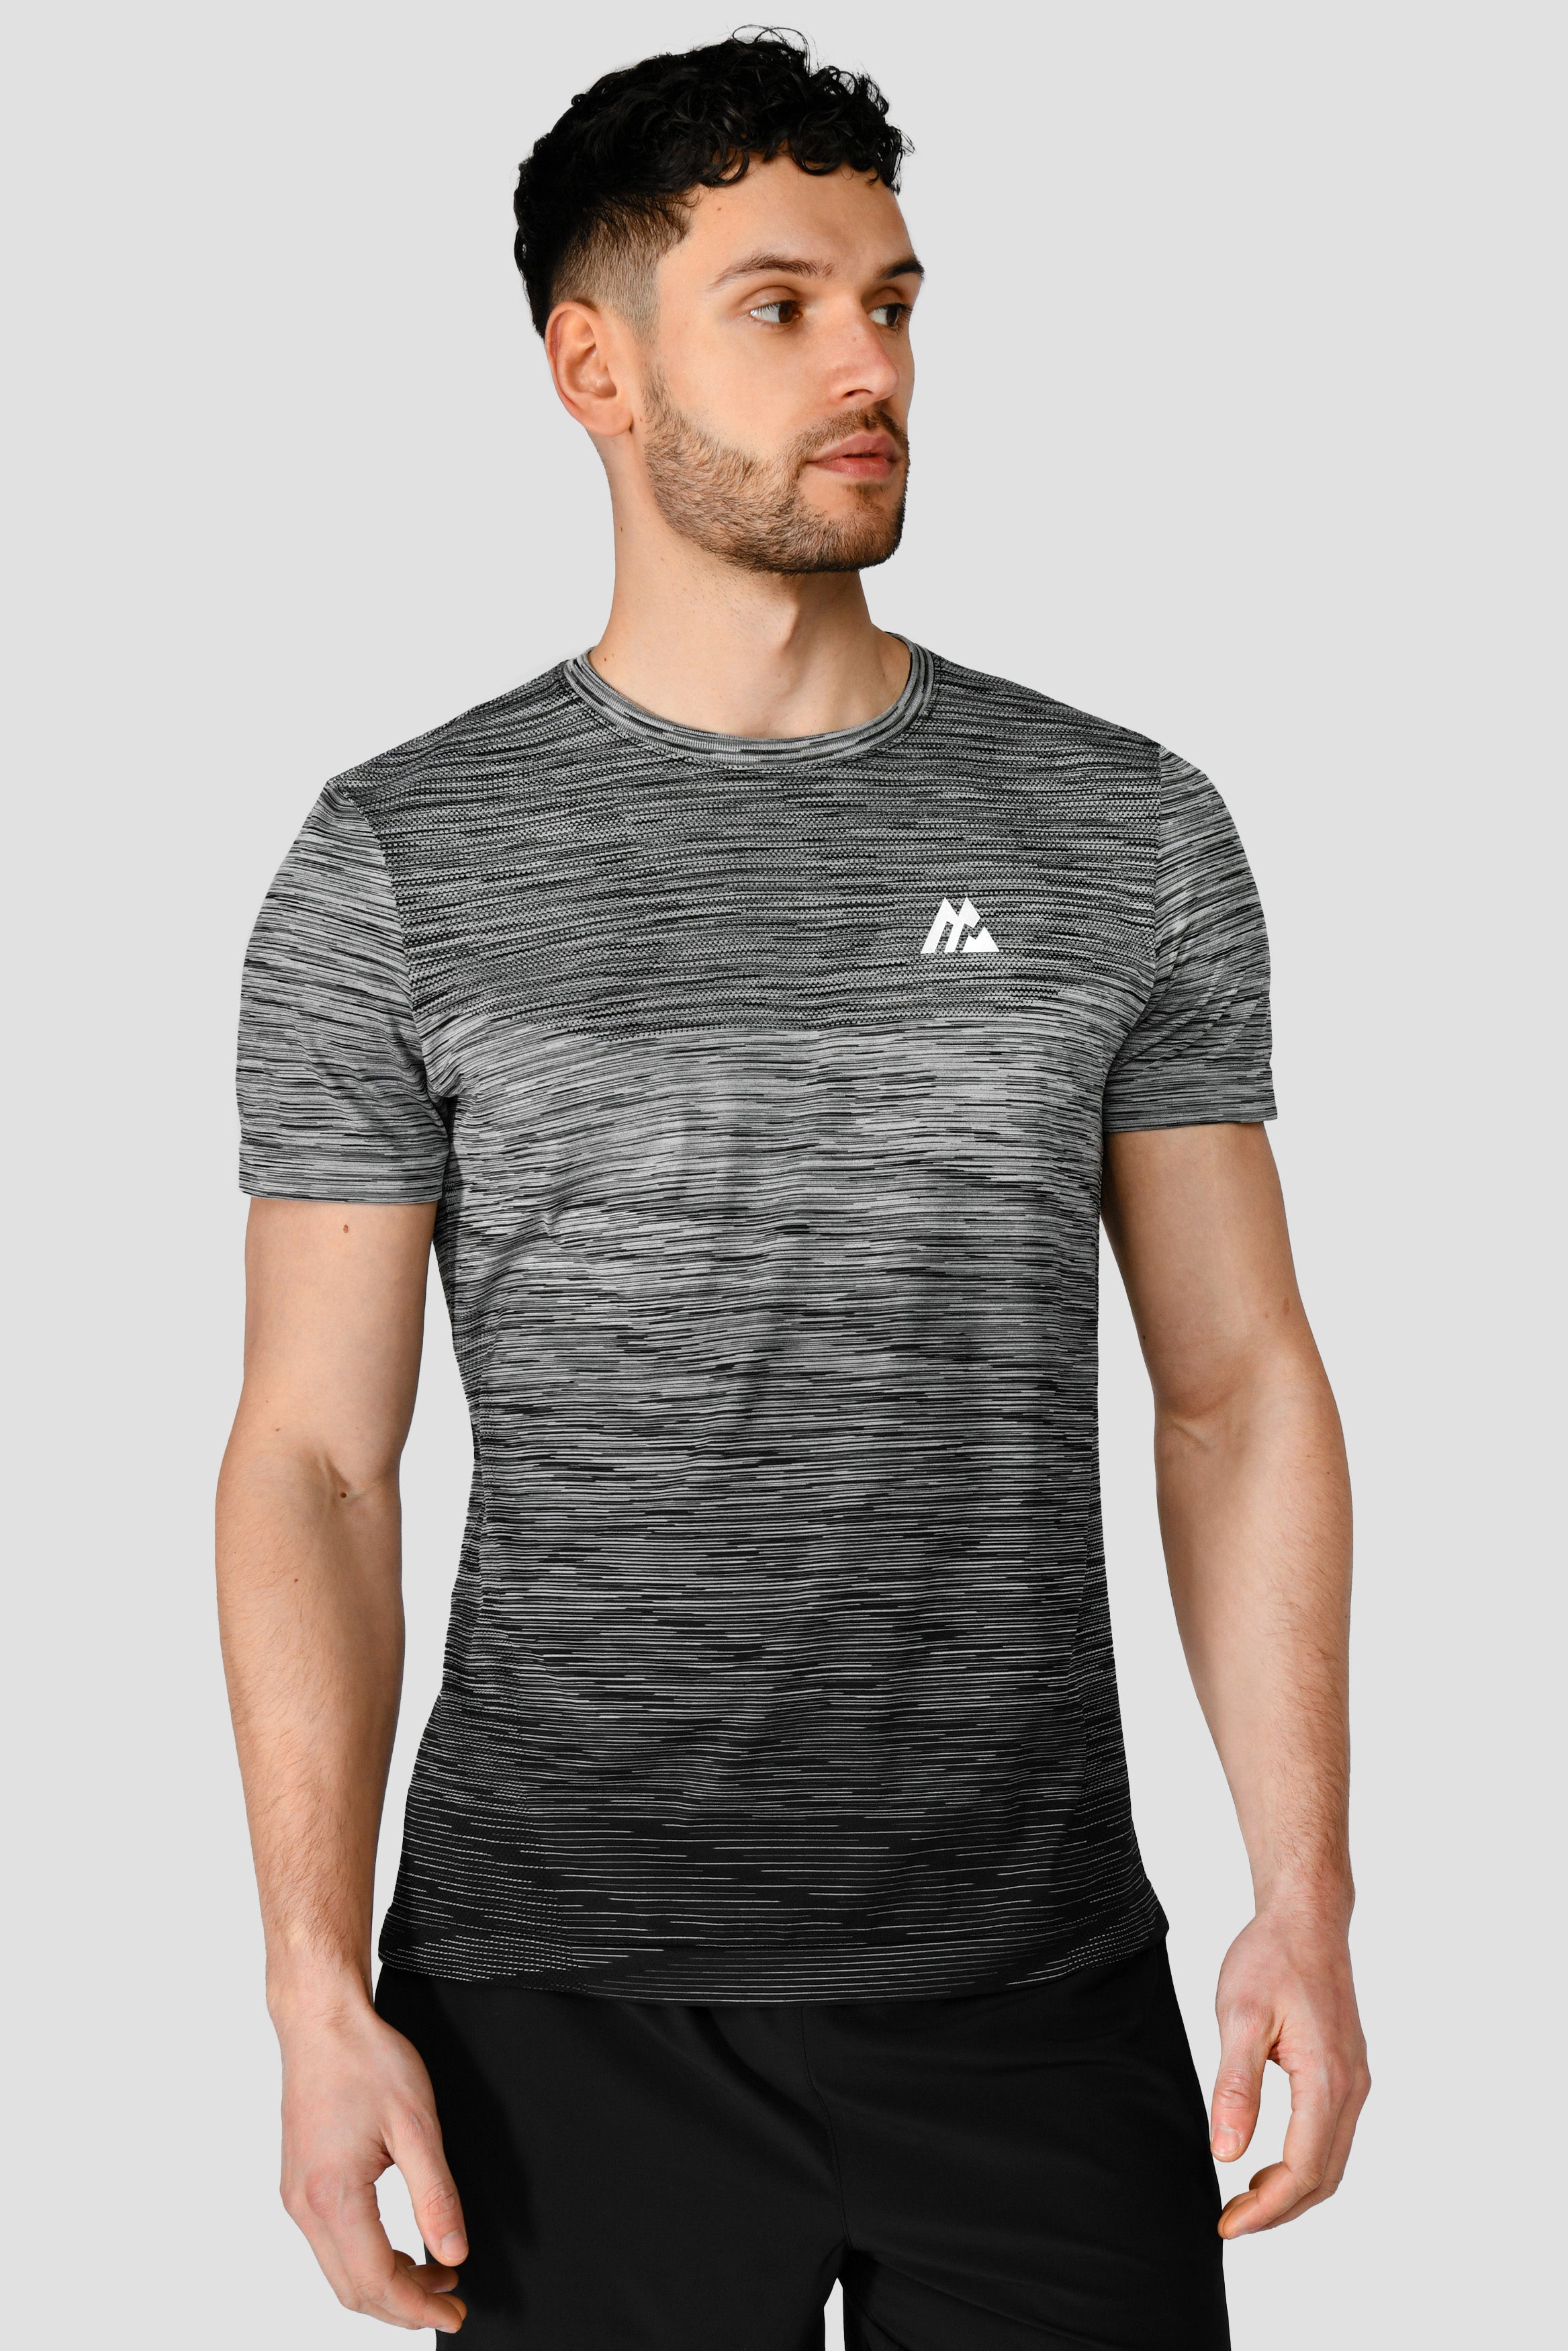 Xersion Mens Monument Gray Performance Running Training Active T